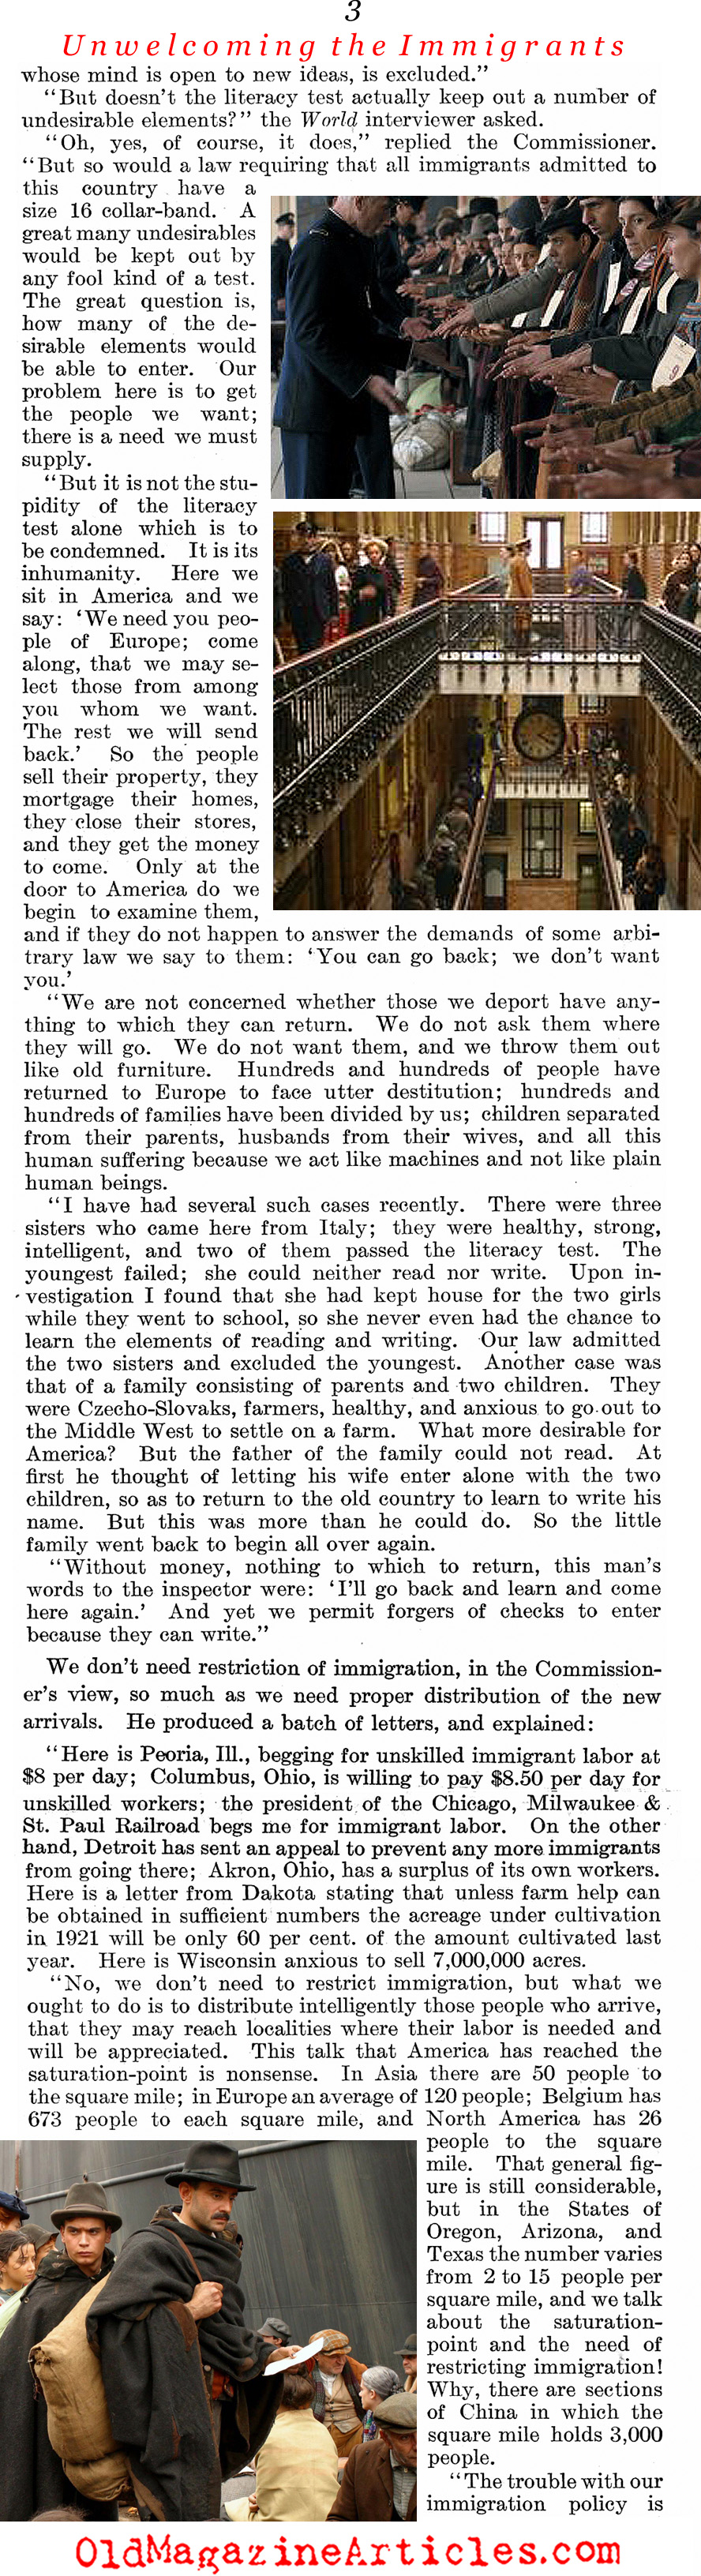 ''Making the Immigrant Unwelcome'' (Literary Digest, 1921)